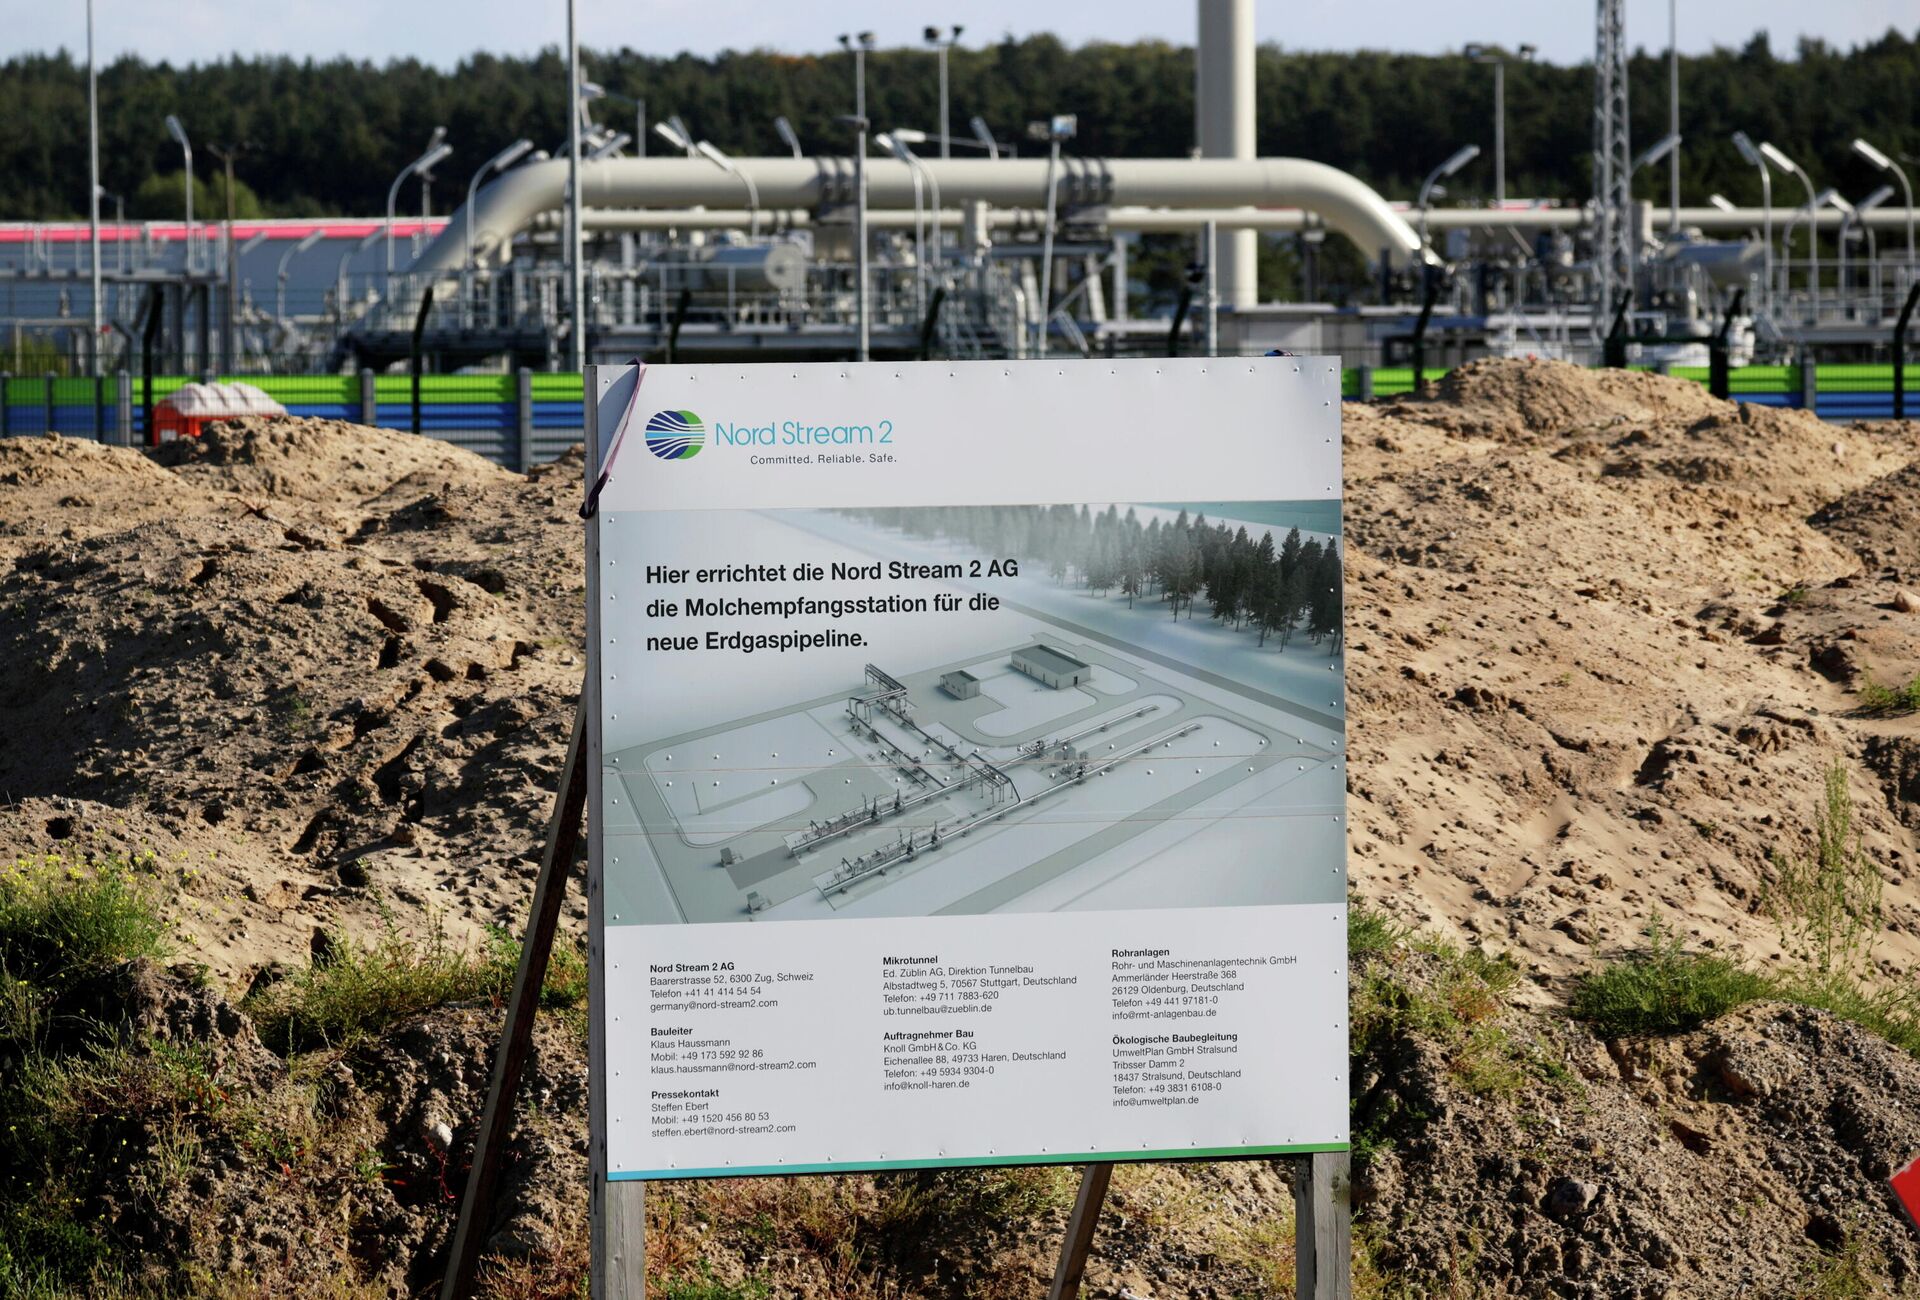 The landfall facility of the Baltic Sea pipeline Nord Stream 2 is pictured in Lubmin, Germany, September 10, 2020 - Sputnik International, 1920, 06.01.2022